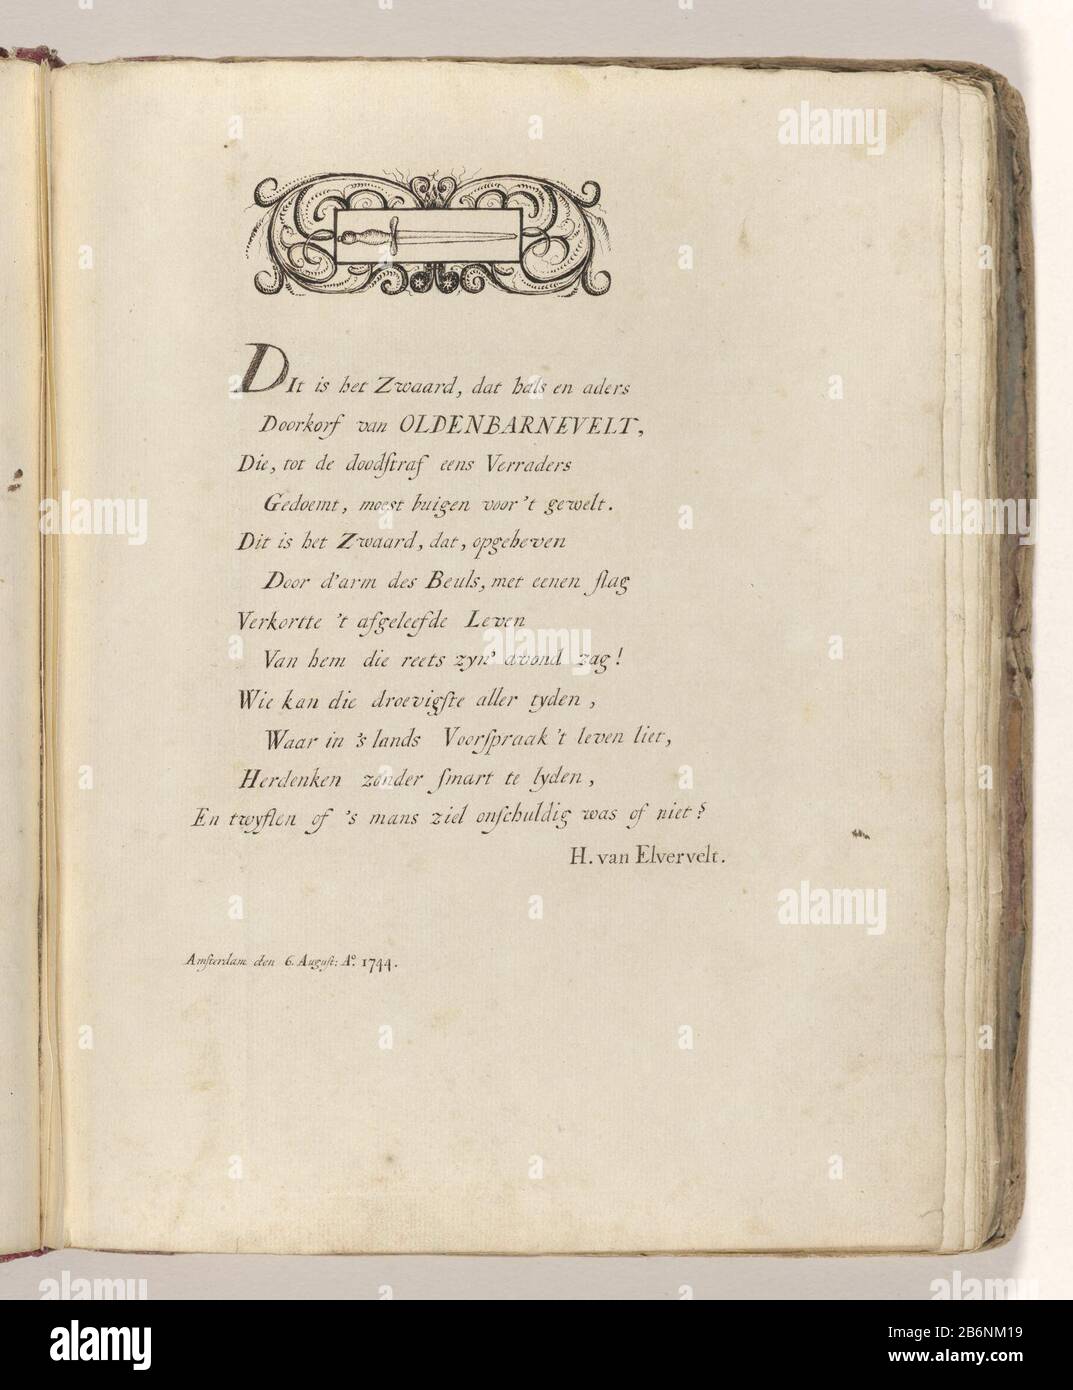 Gedicht op het zwaard waarmee Johan van Oldenbarnevelt in 1619 zou zijn onthoofd Fresh off of Henrik Elvervelt with emblem drawn with the sword. Part of the book of poems from the years 1743-1745 to the sword with which Johan van Barneveld would be beheaded in 1619. The sword was owned by French Greenwood. Manufacturer : writer Henrik of Elvervelt (personally signed) Place manufacture: Amsterdam Date: Aug 6 1744 Physical features: handwriting with pen in brown material: paper ink technology: letter Dimensions: sheet: H 275 mm × W 220 mm Subject: Condemnation and execution of Johan van Barnevel Stock Photo